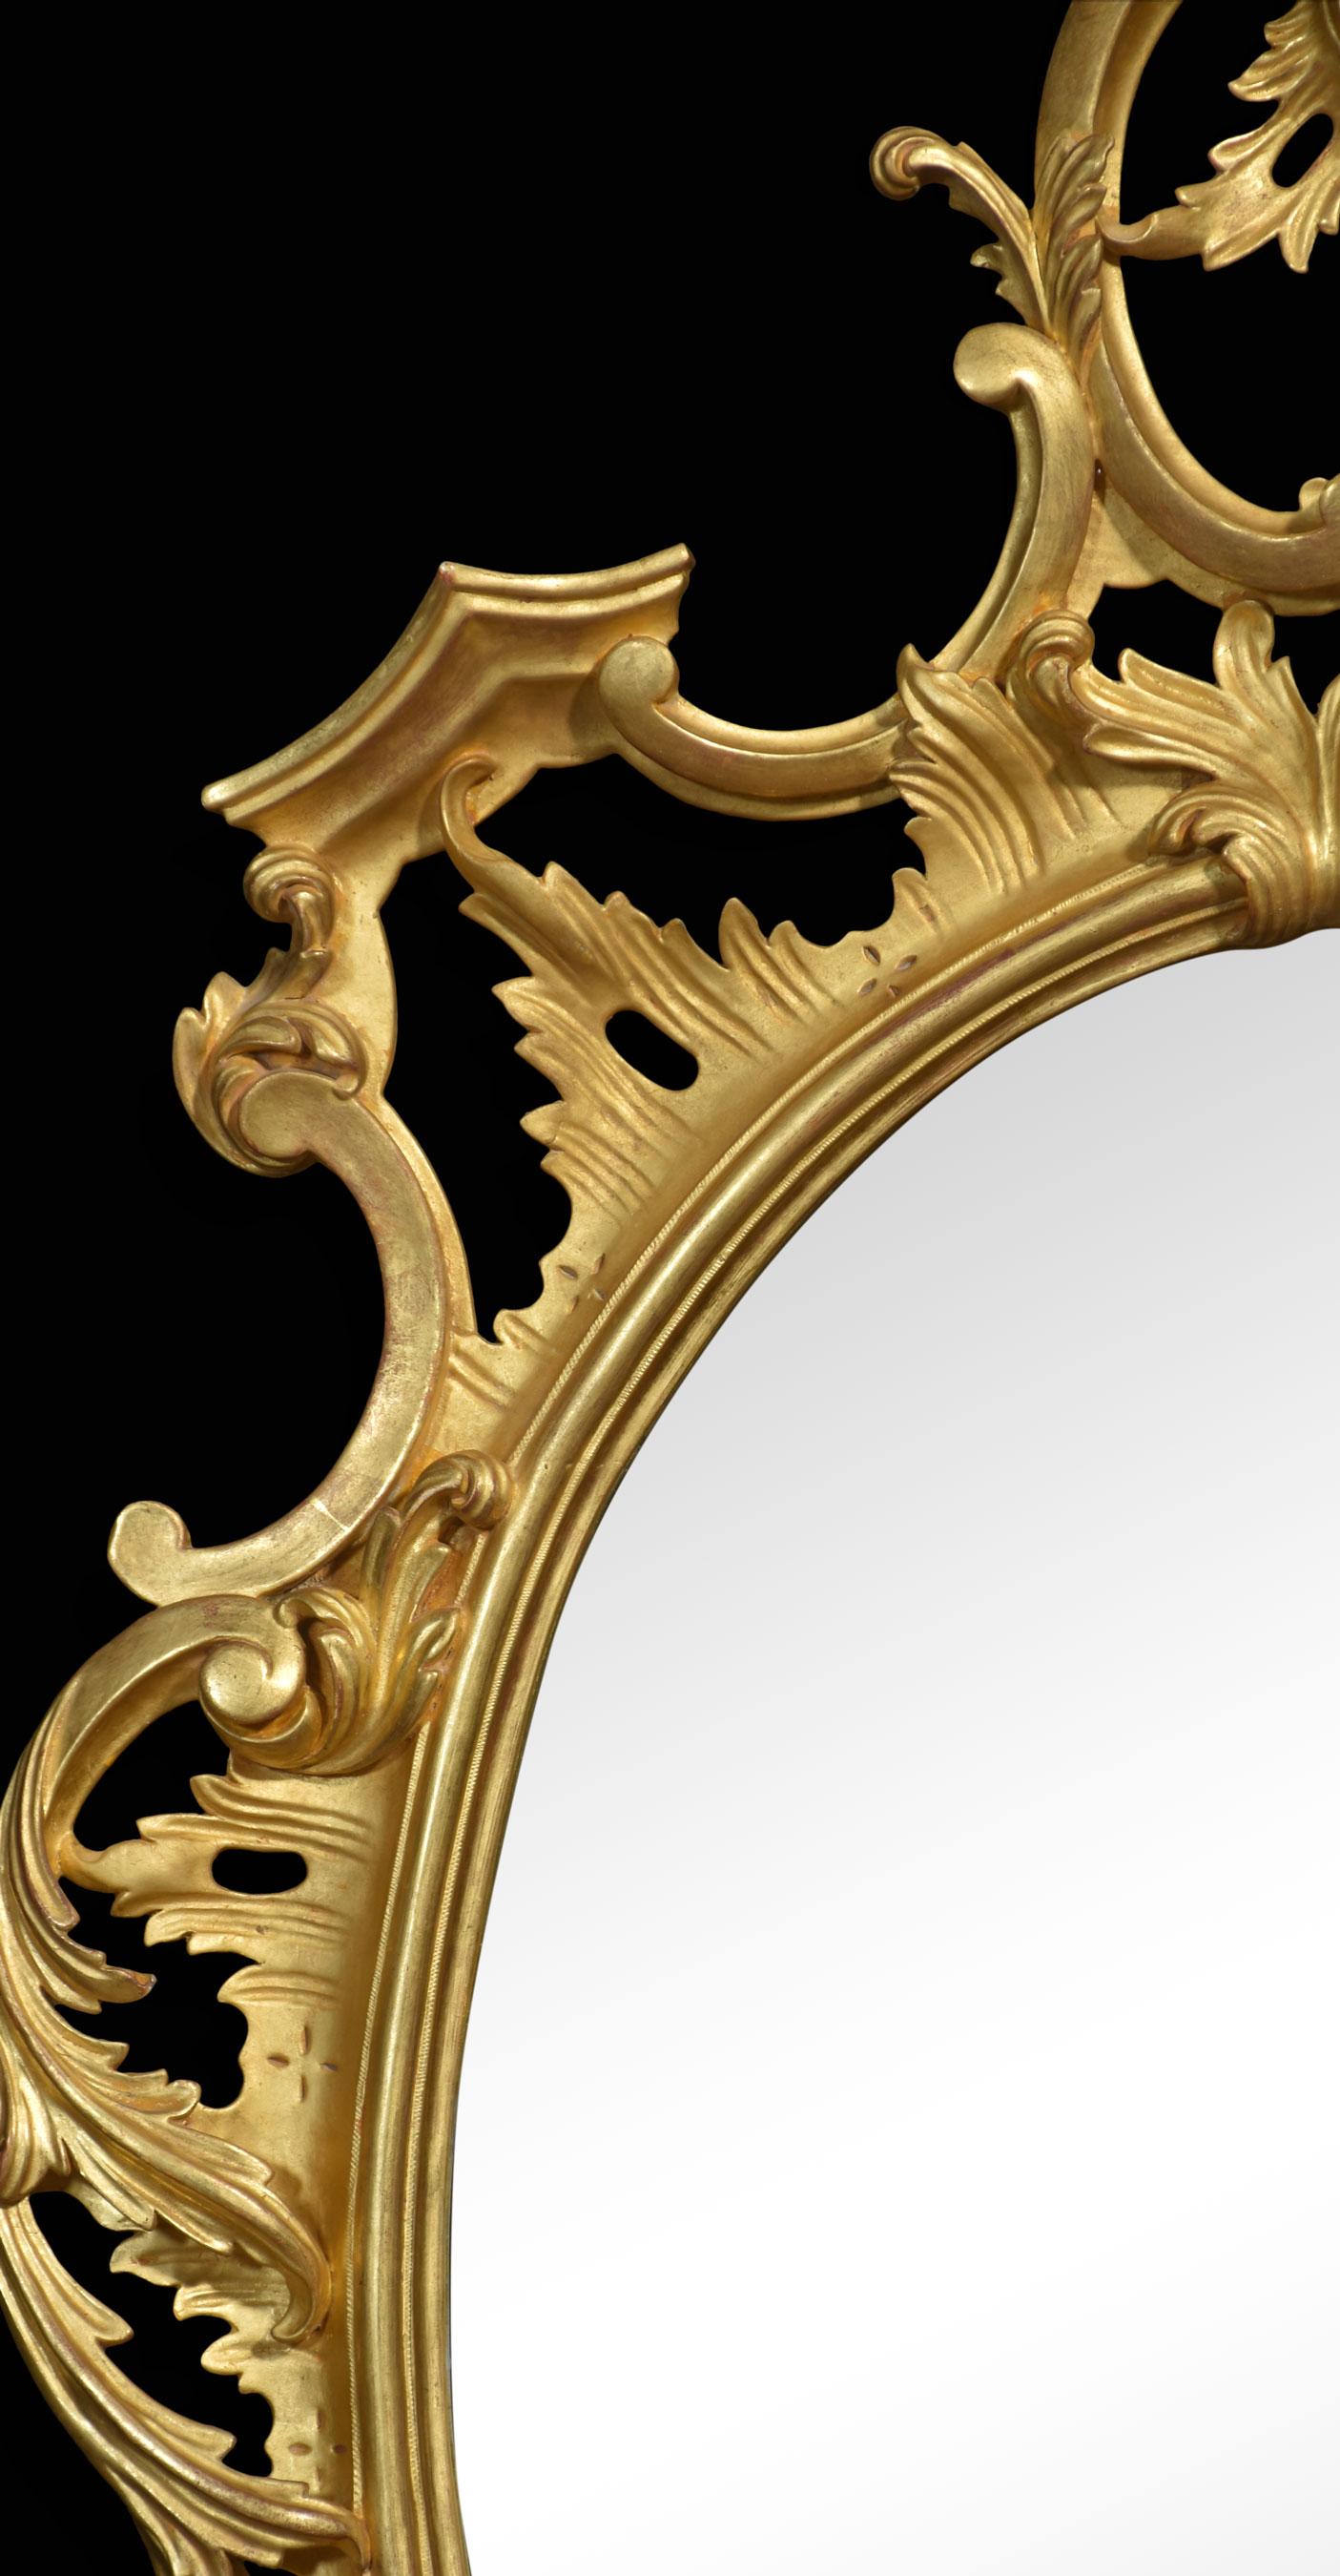 Georgian-style Gilt-wood wall mirror, the well-carved frame decorated with foliated and scrolling detail surrounding the original oval mirror plate.
Dimensions
Height 63.5 Inches
Width 35.5 Inches
Depth 3 Inches